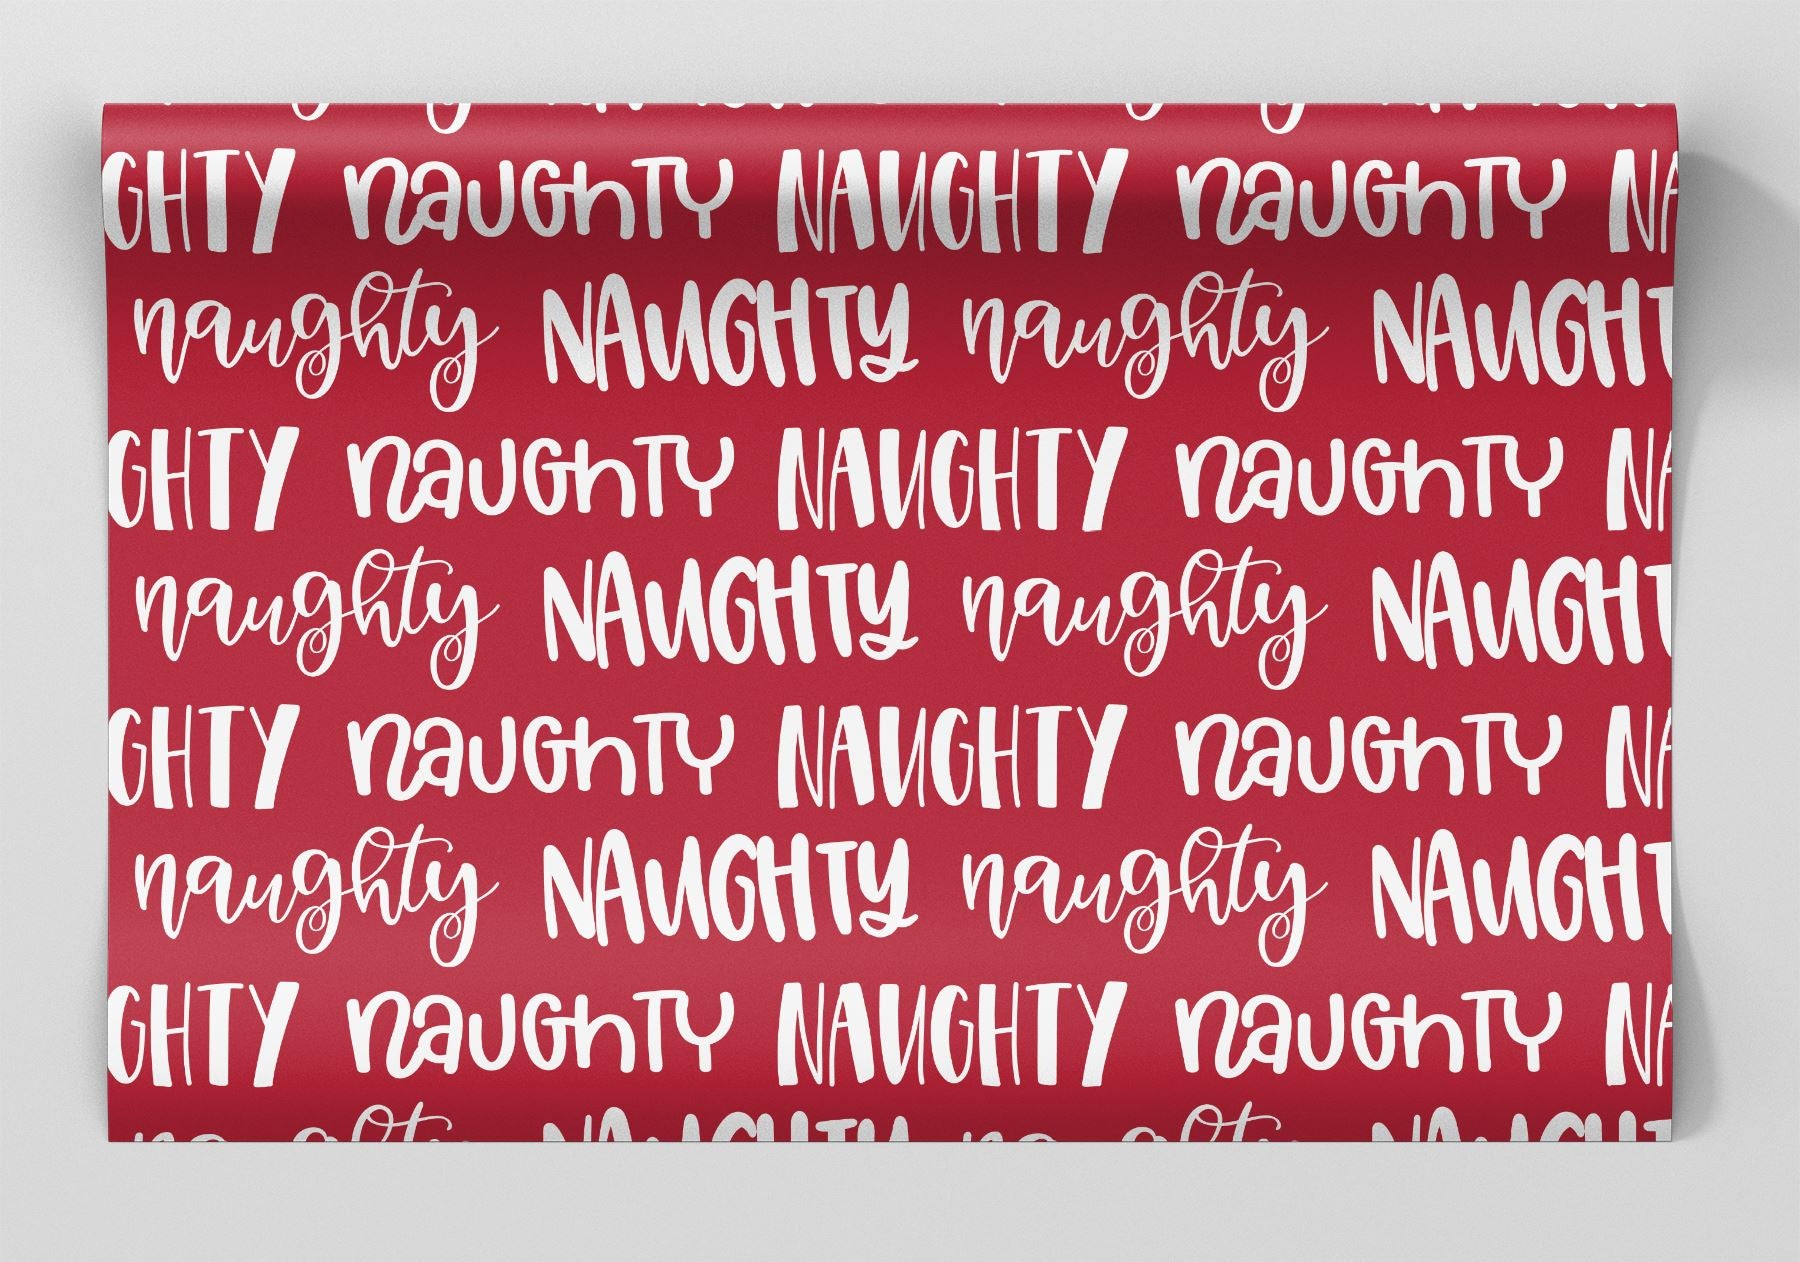 Extra Naughty List Wrapping Paper Alexander's 